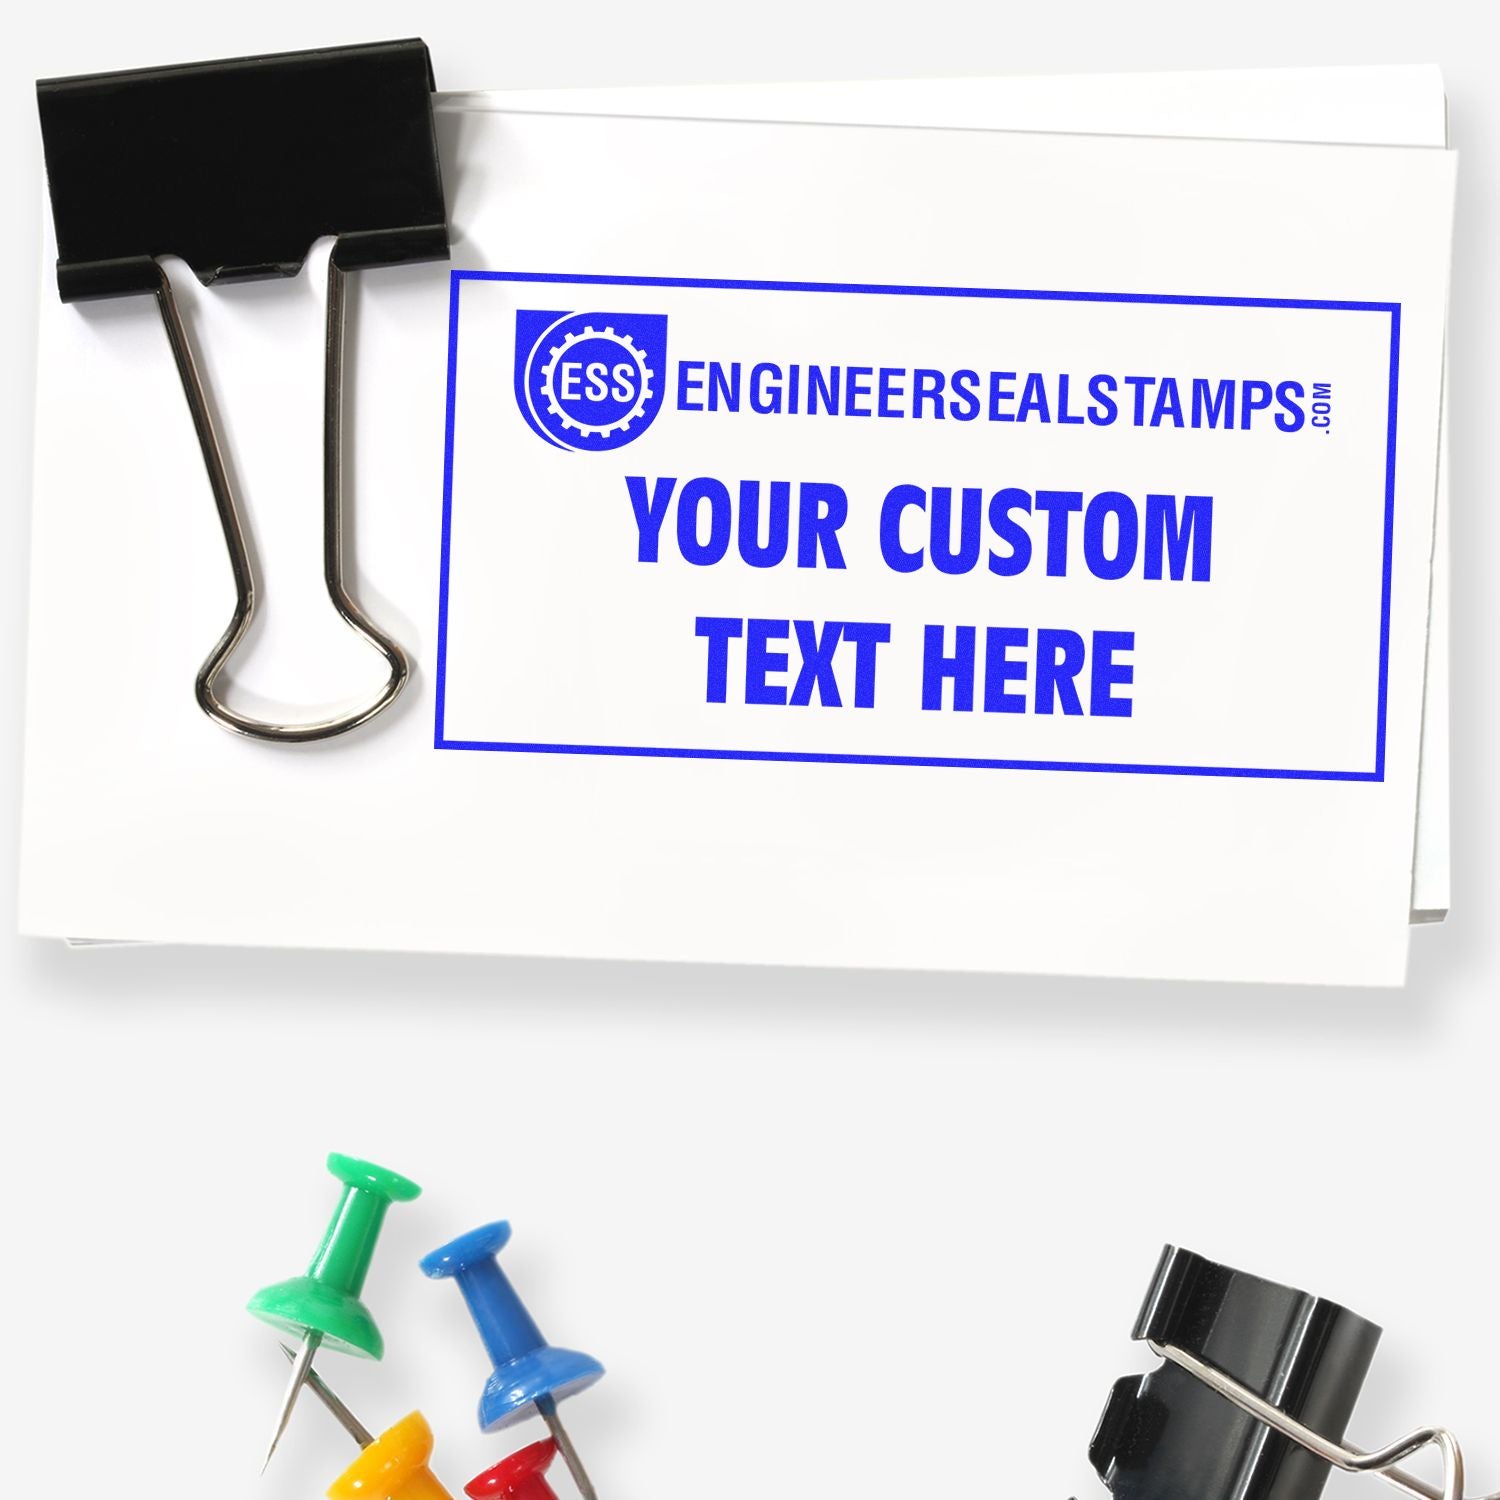 Custom Address Stamp - 20 Font Options - 3 Line Self-Inking Address Stamp -  Up to 3 Lines of Customized Text | Multiple Ink Color Options (Small)